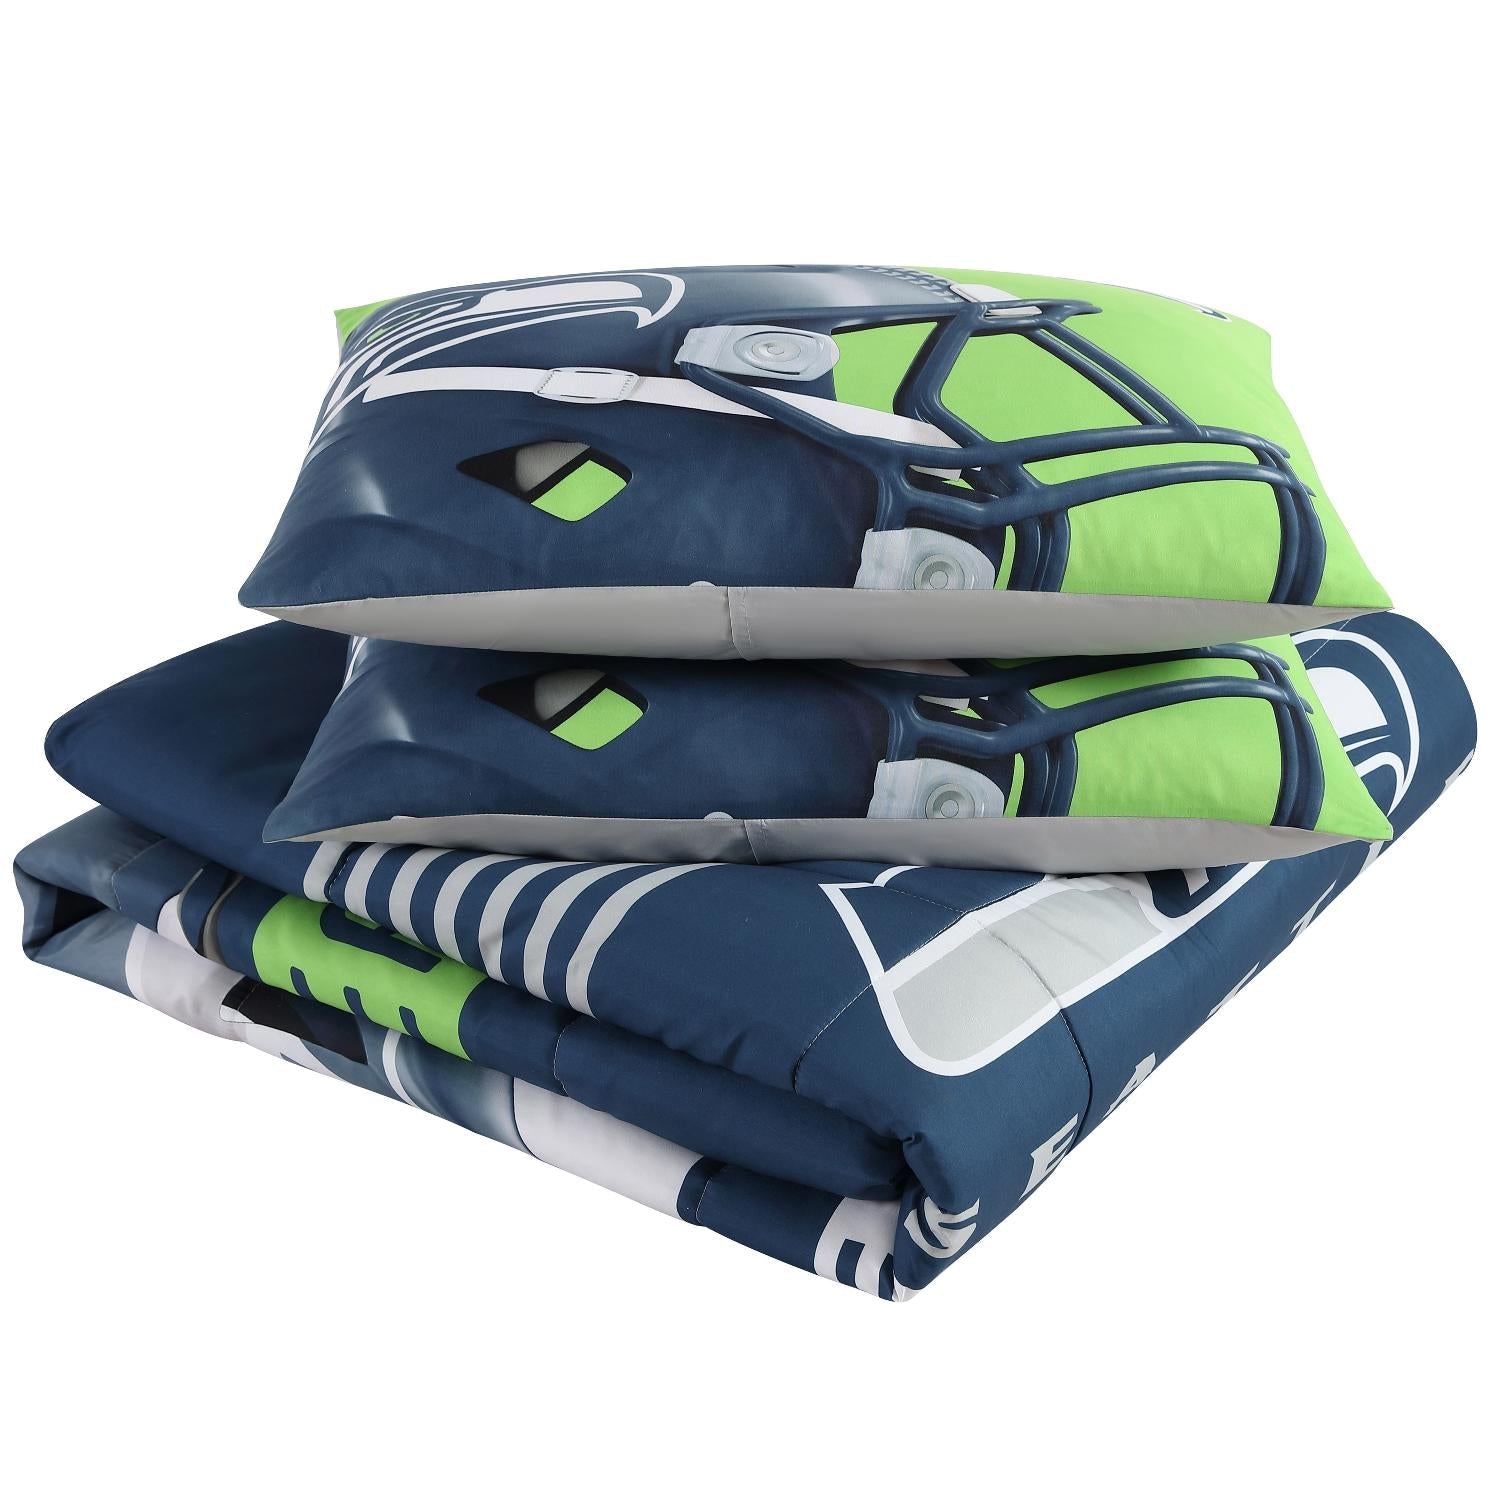 Seattle Seahawks NFL Officially Licensed 3-Piece Comforter Set - Folded